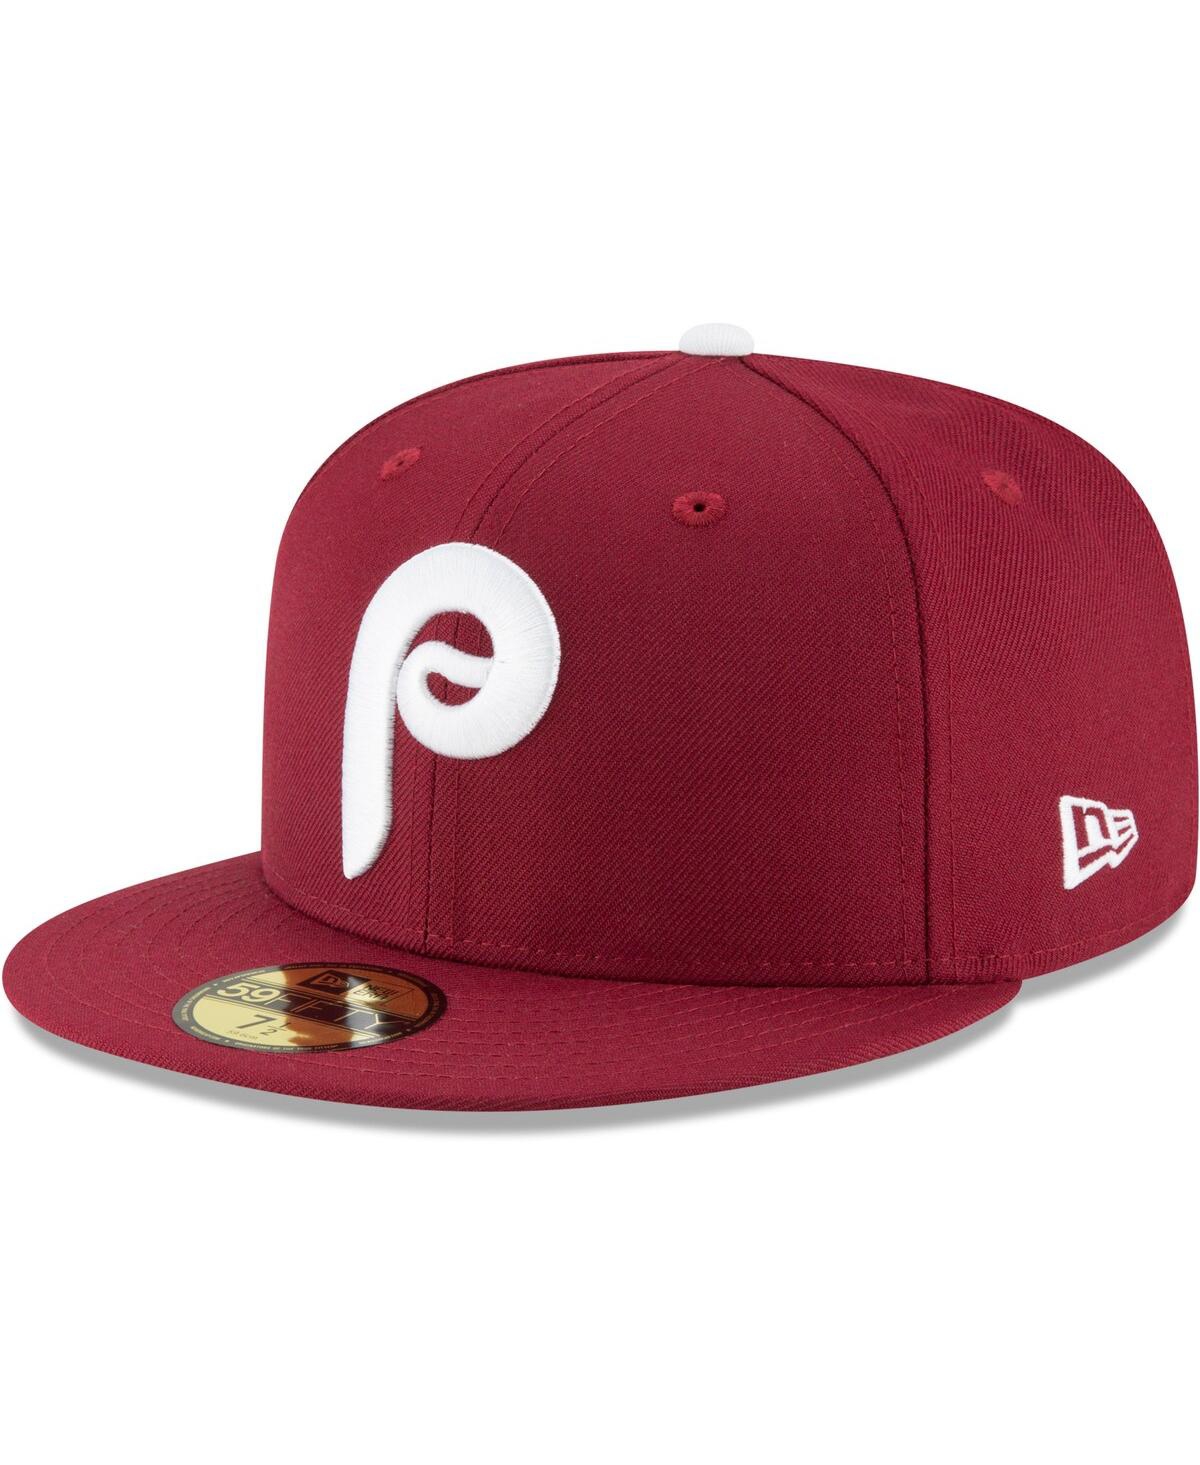 Shop New Era Men's  Maroon Philadelphia Phillies Cooperstown Collection Wool 59fifty Fitted Hat